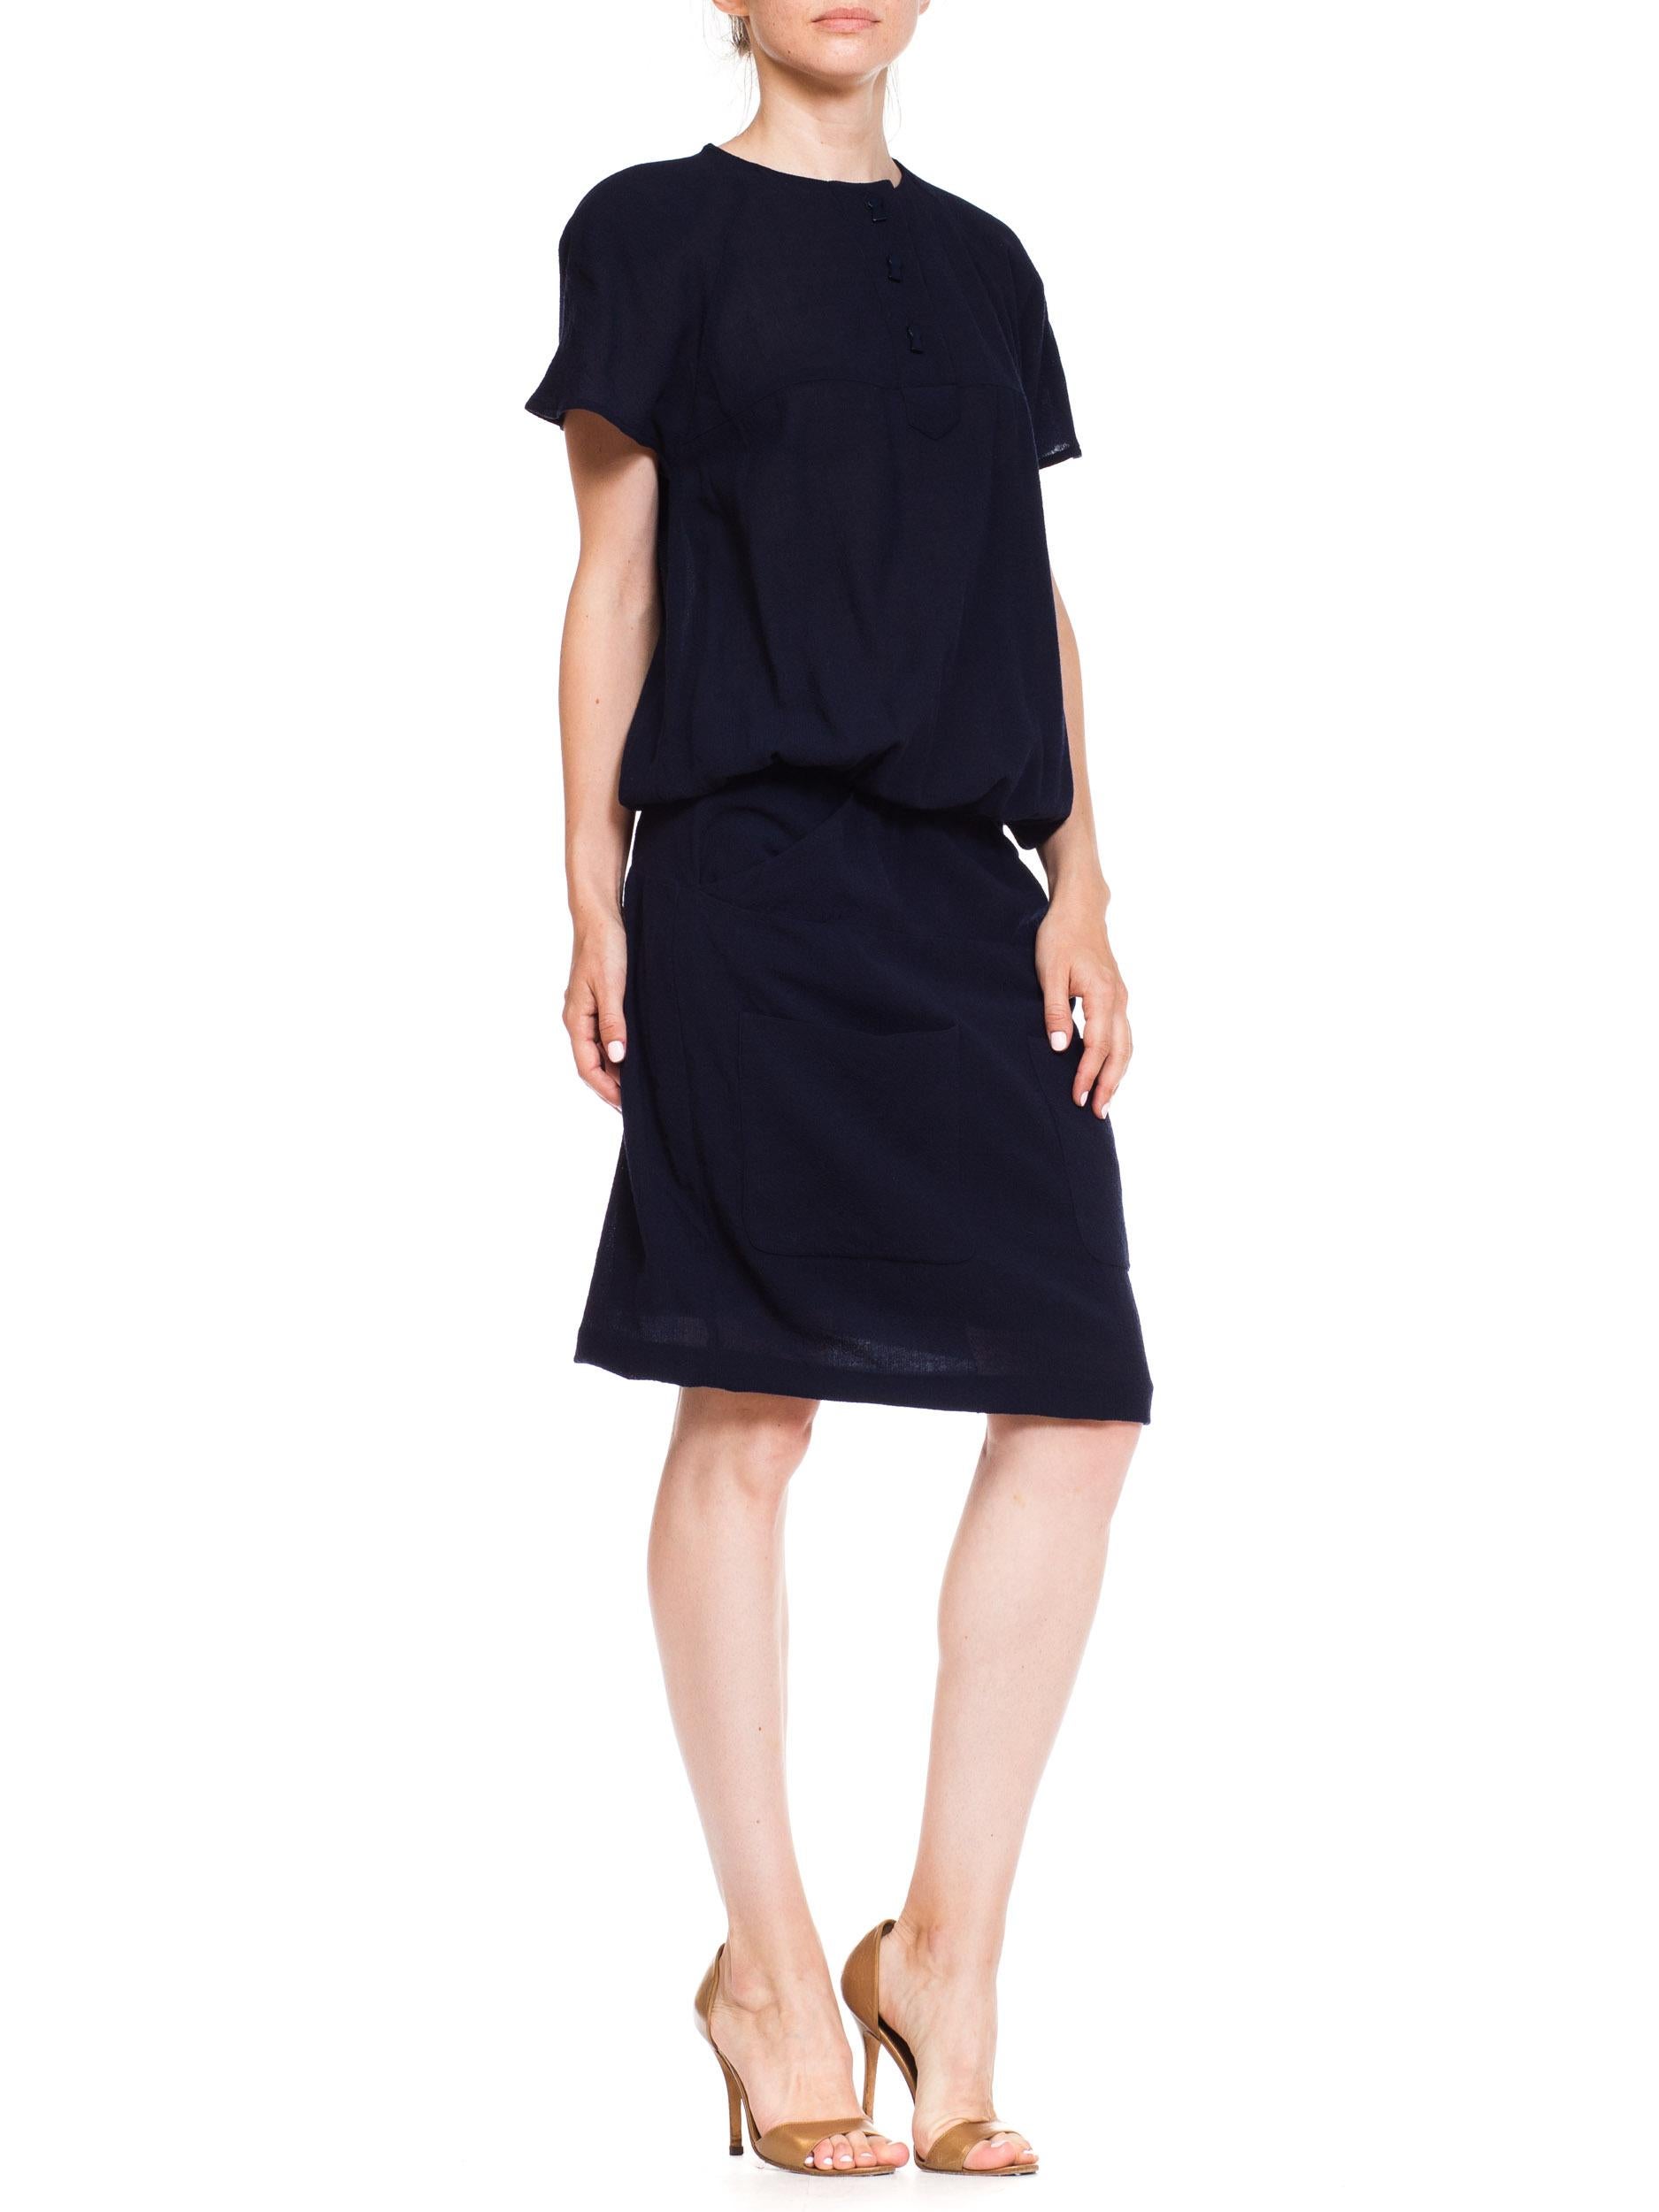 Women's 1980s Karl Lagerfeld Navy Blue Crepe Dress With Key Hole Buttons